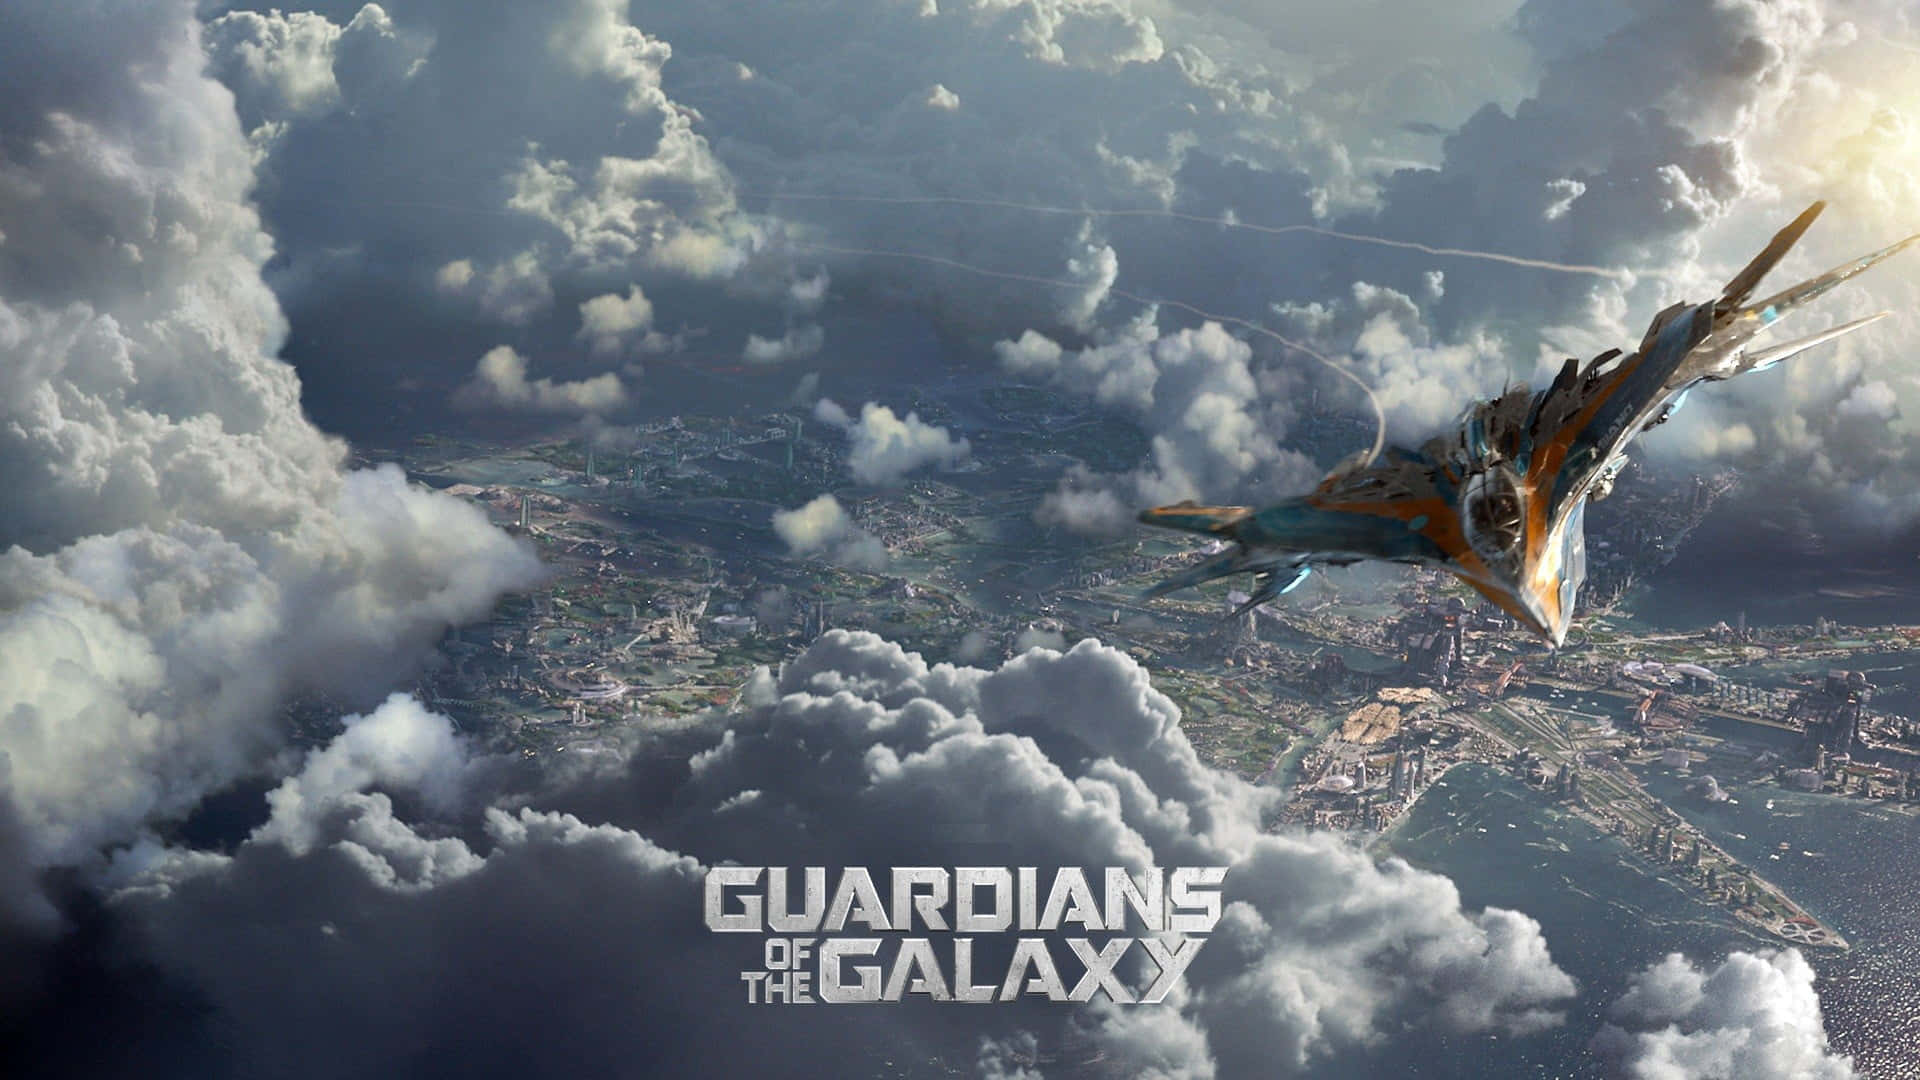 Marvel Universe Milano Spacecraft Of The Guardians Wallpaper